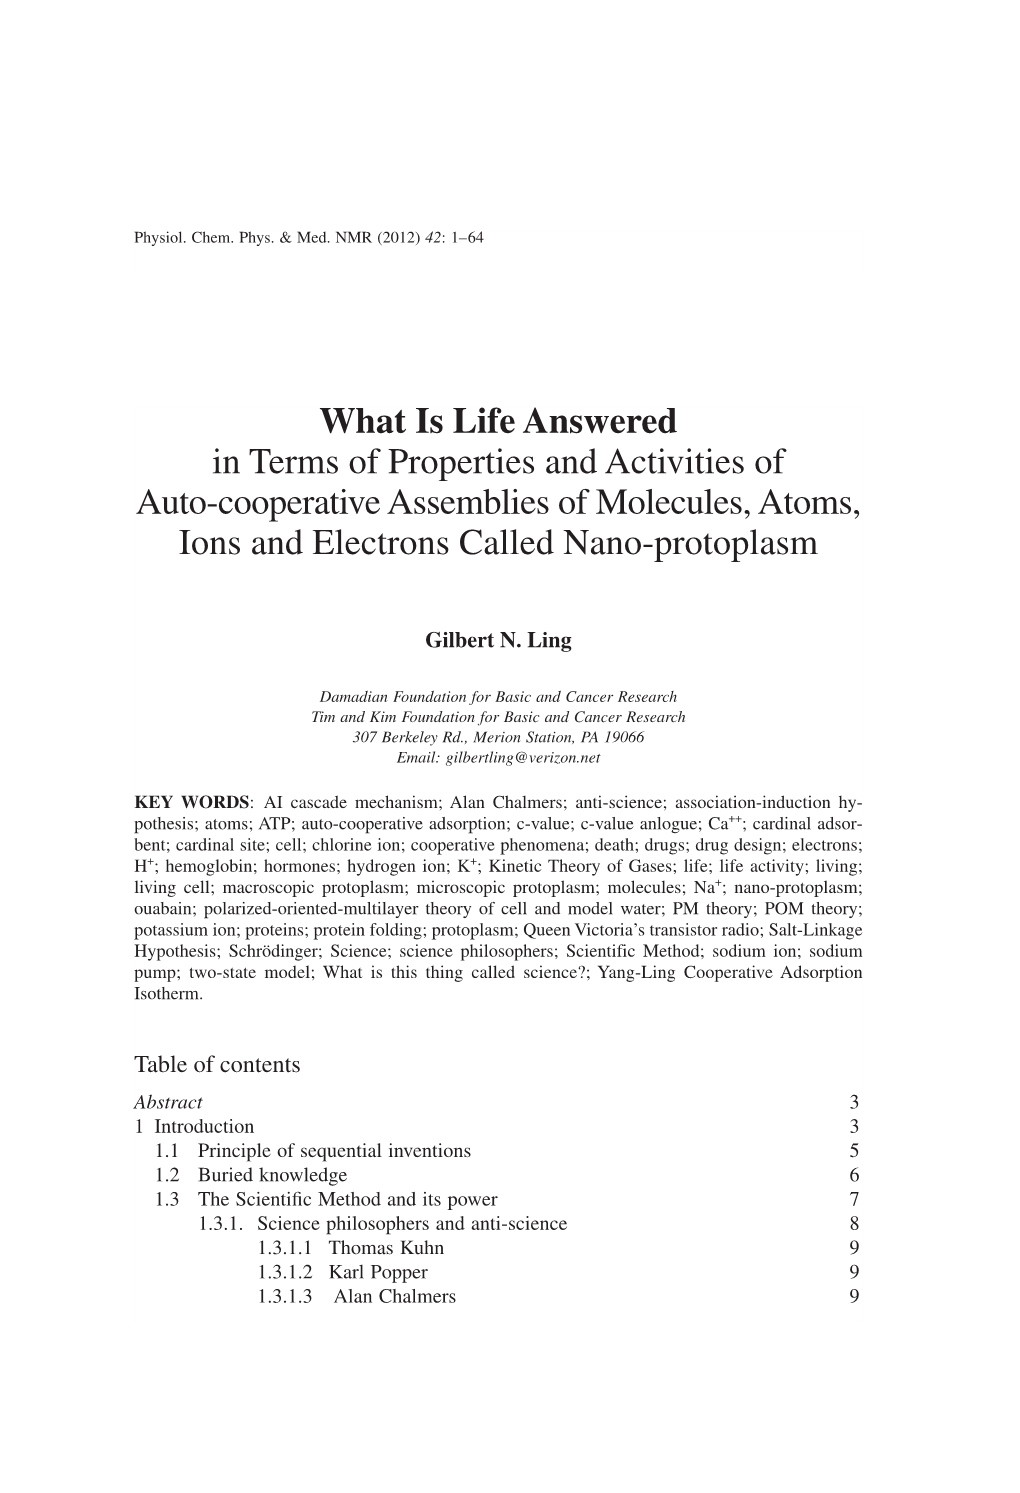 What Is Life Answered in Terms of Properties and Activities of Auto-Cooperative Assemblies of Molecules, Atoms, Ions and Electrons Called Nano-Protoplasm